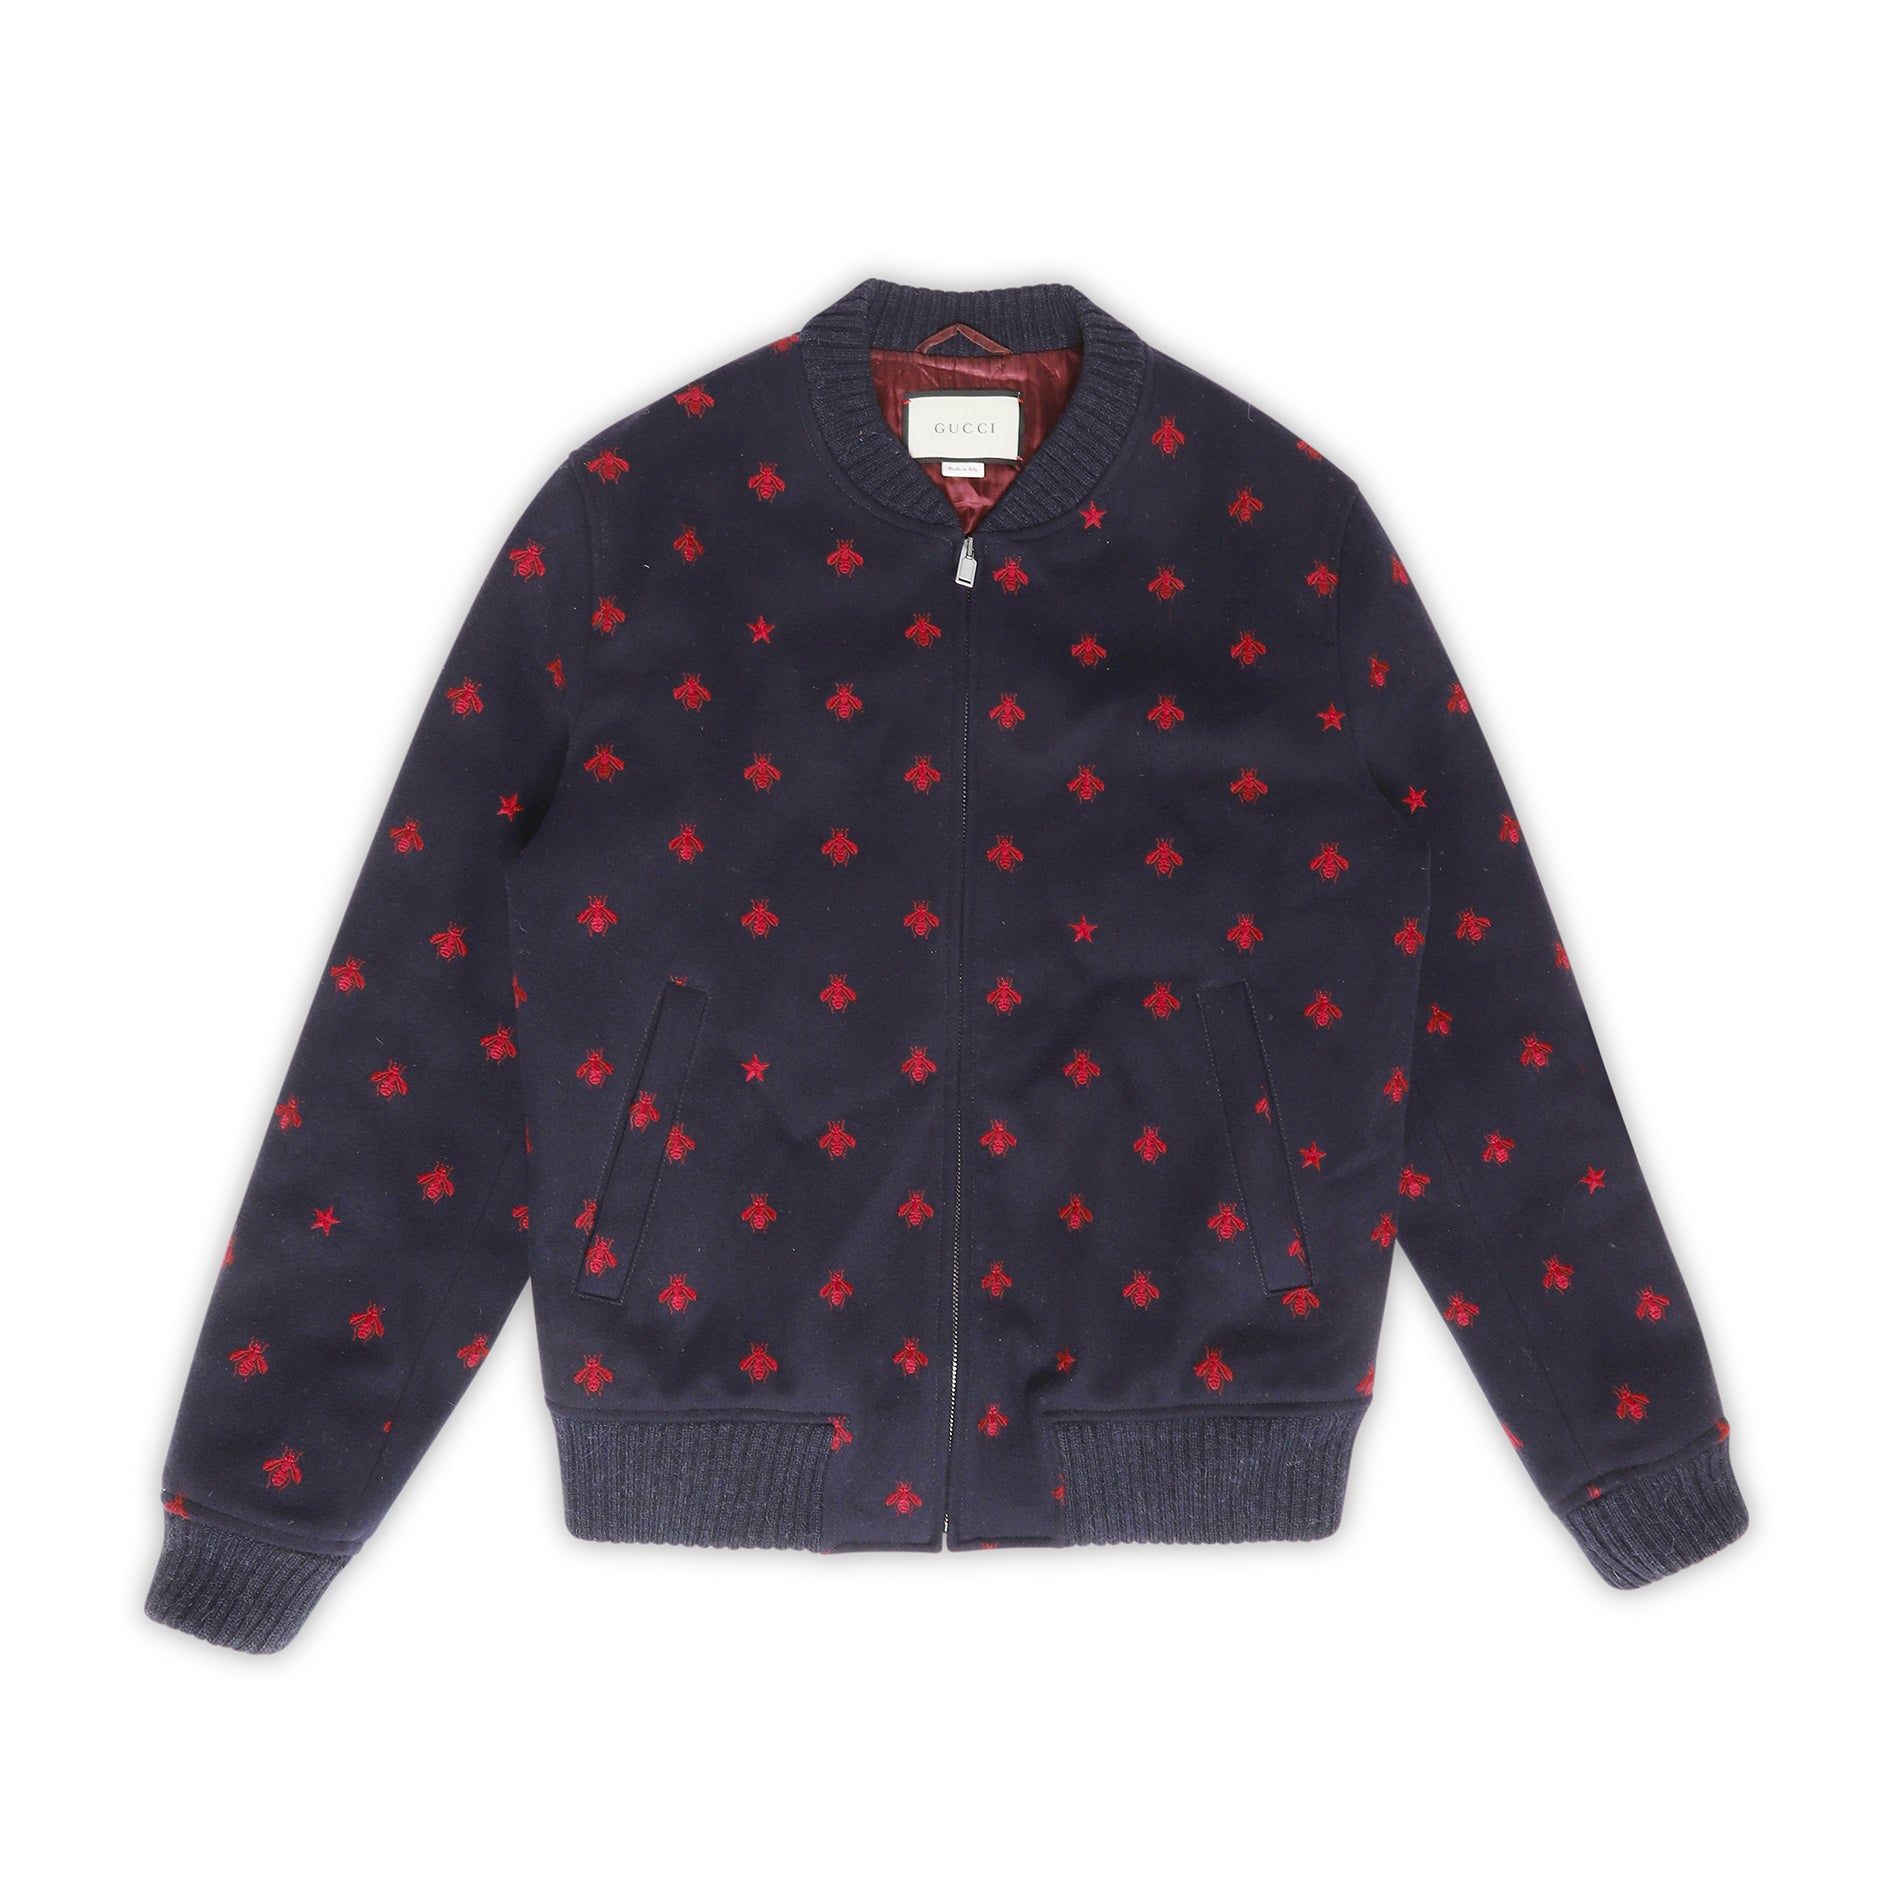 Gucci Bee Embroidered Wool Bomber